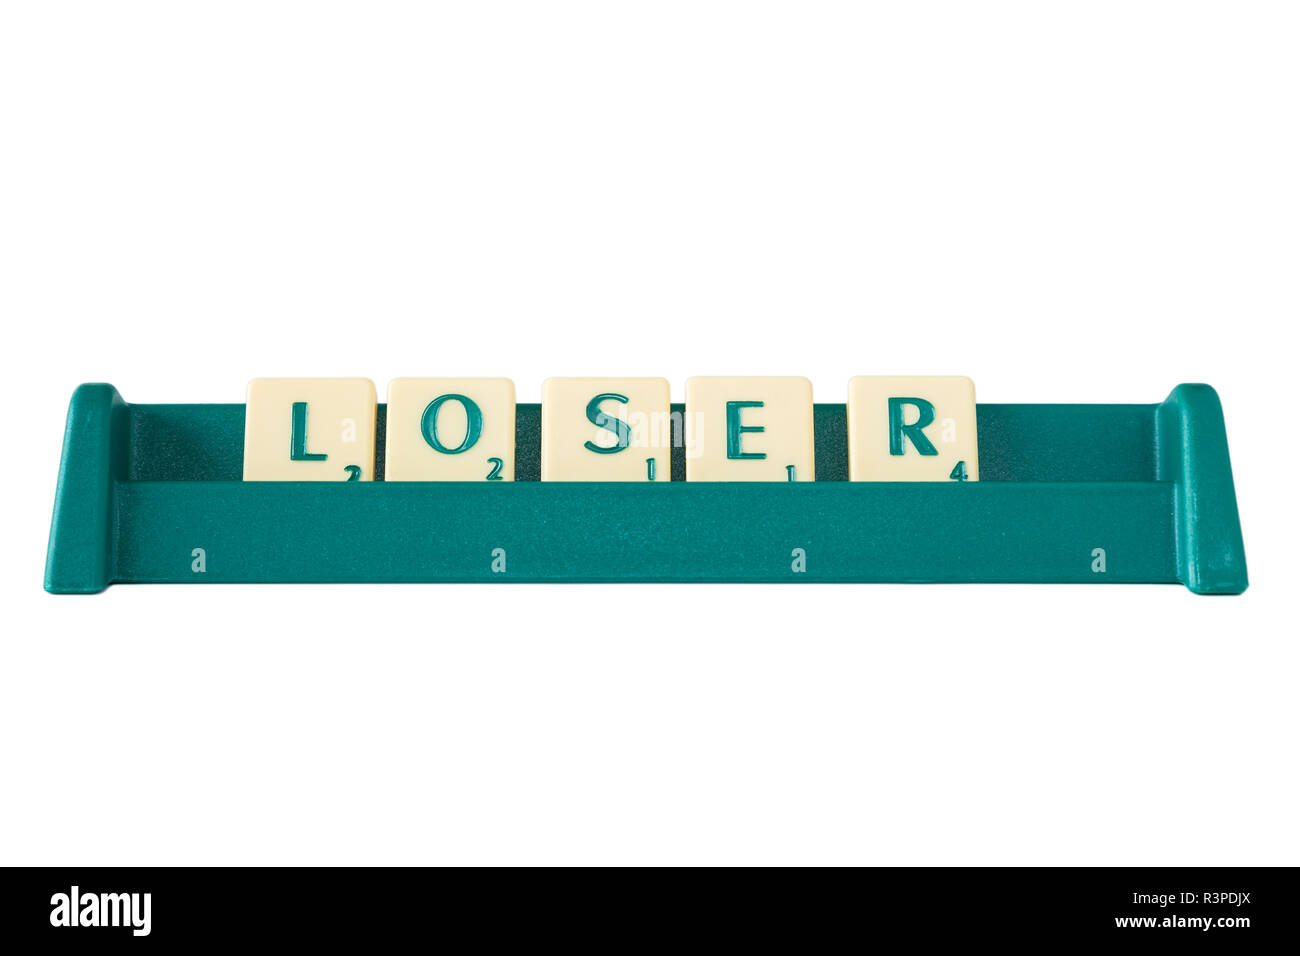 Scrabble game letter tiles with score value on a stand forming the word 'Loser'. Isolated on white background. Stock Photo